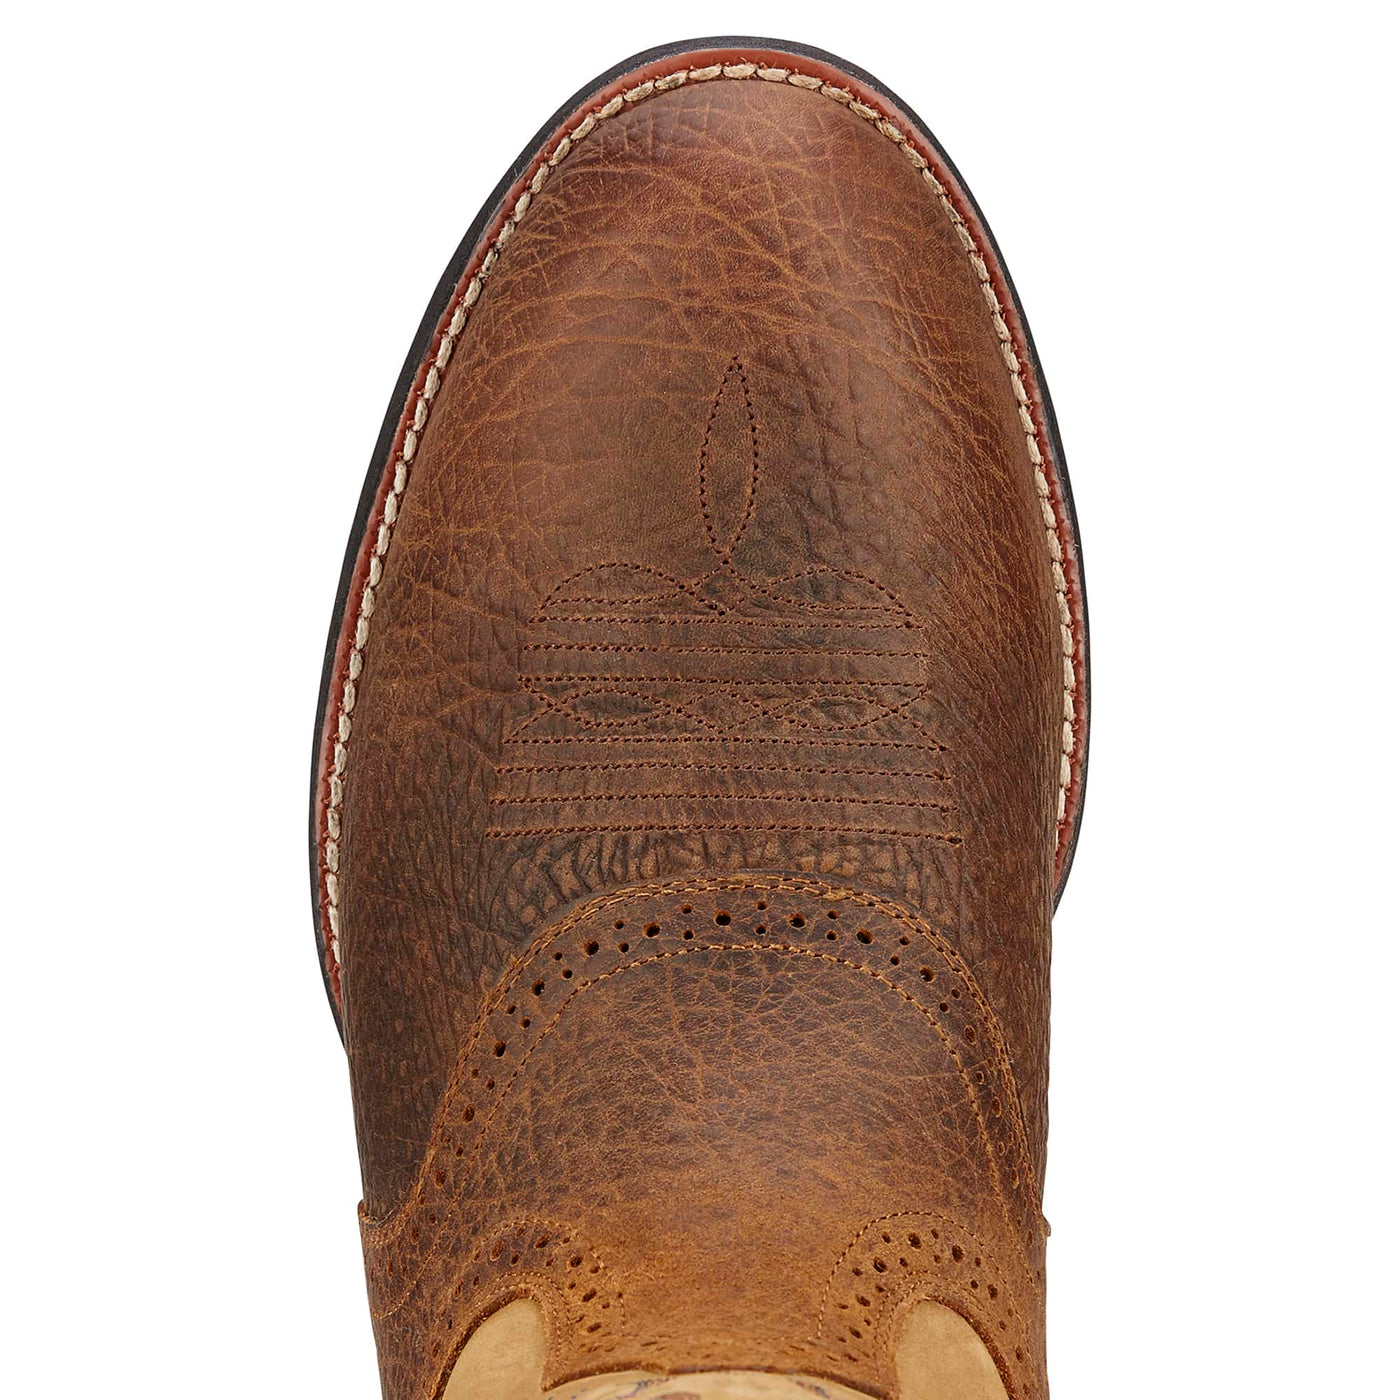 Ariat Boots | Men's Western Cowboy | Heritage Stockman | Toe | Outback Traders Australia